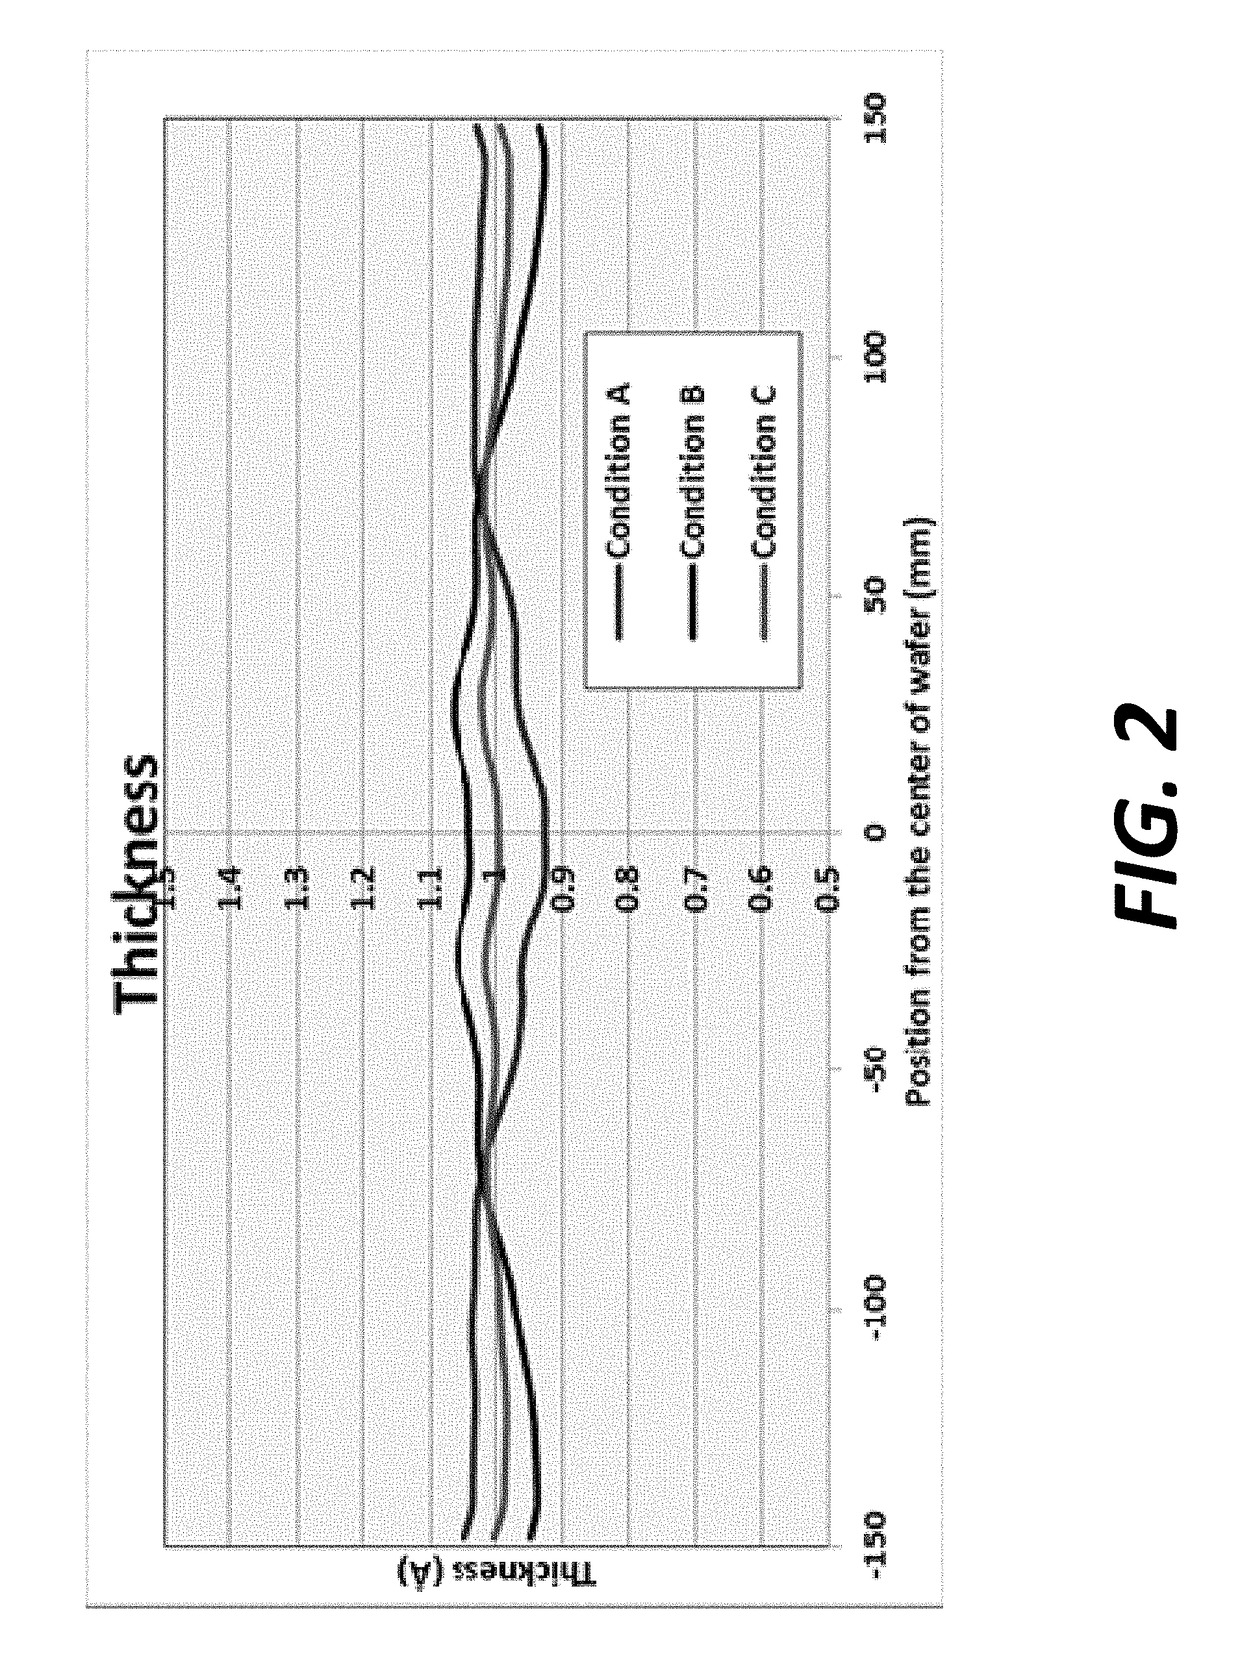 Radial and thickness control via biased multi-port injection settings